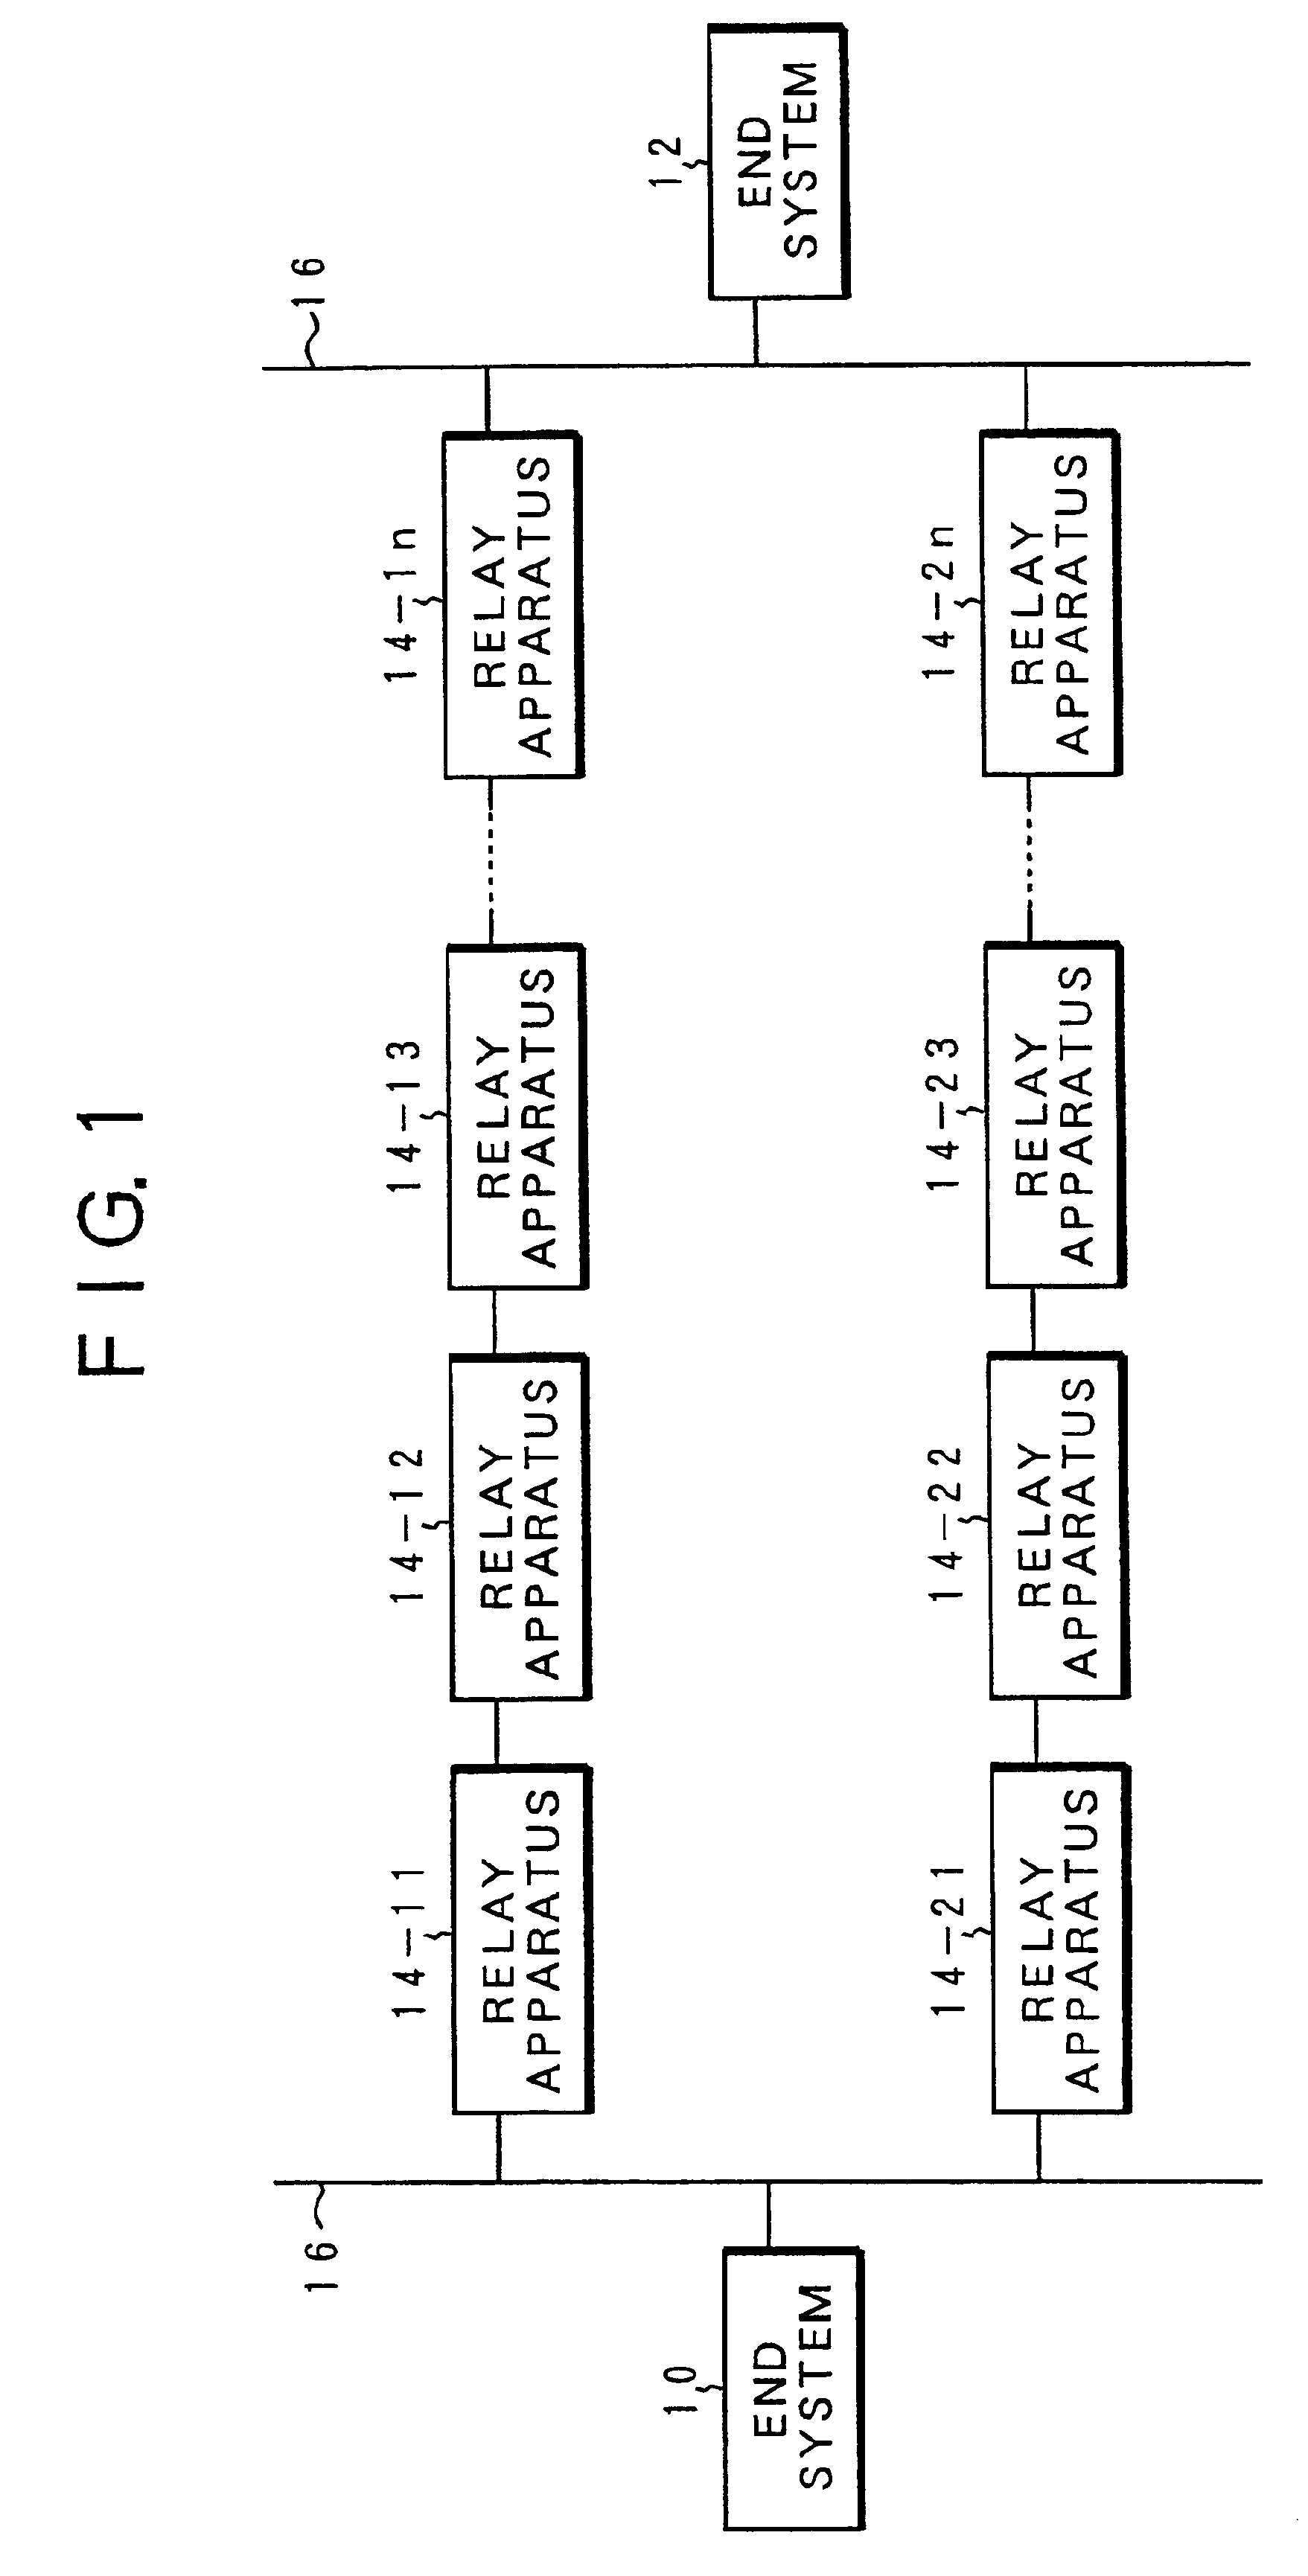 Communication system, relay apparatus, end system, and communicating method